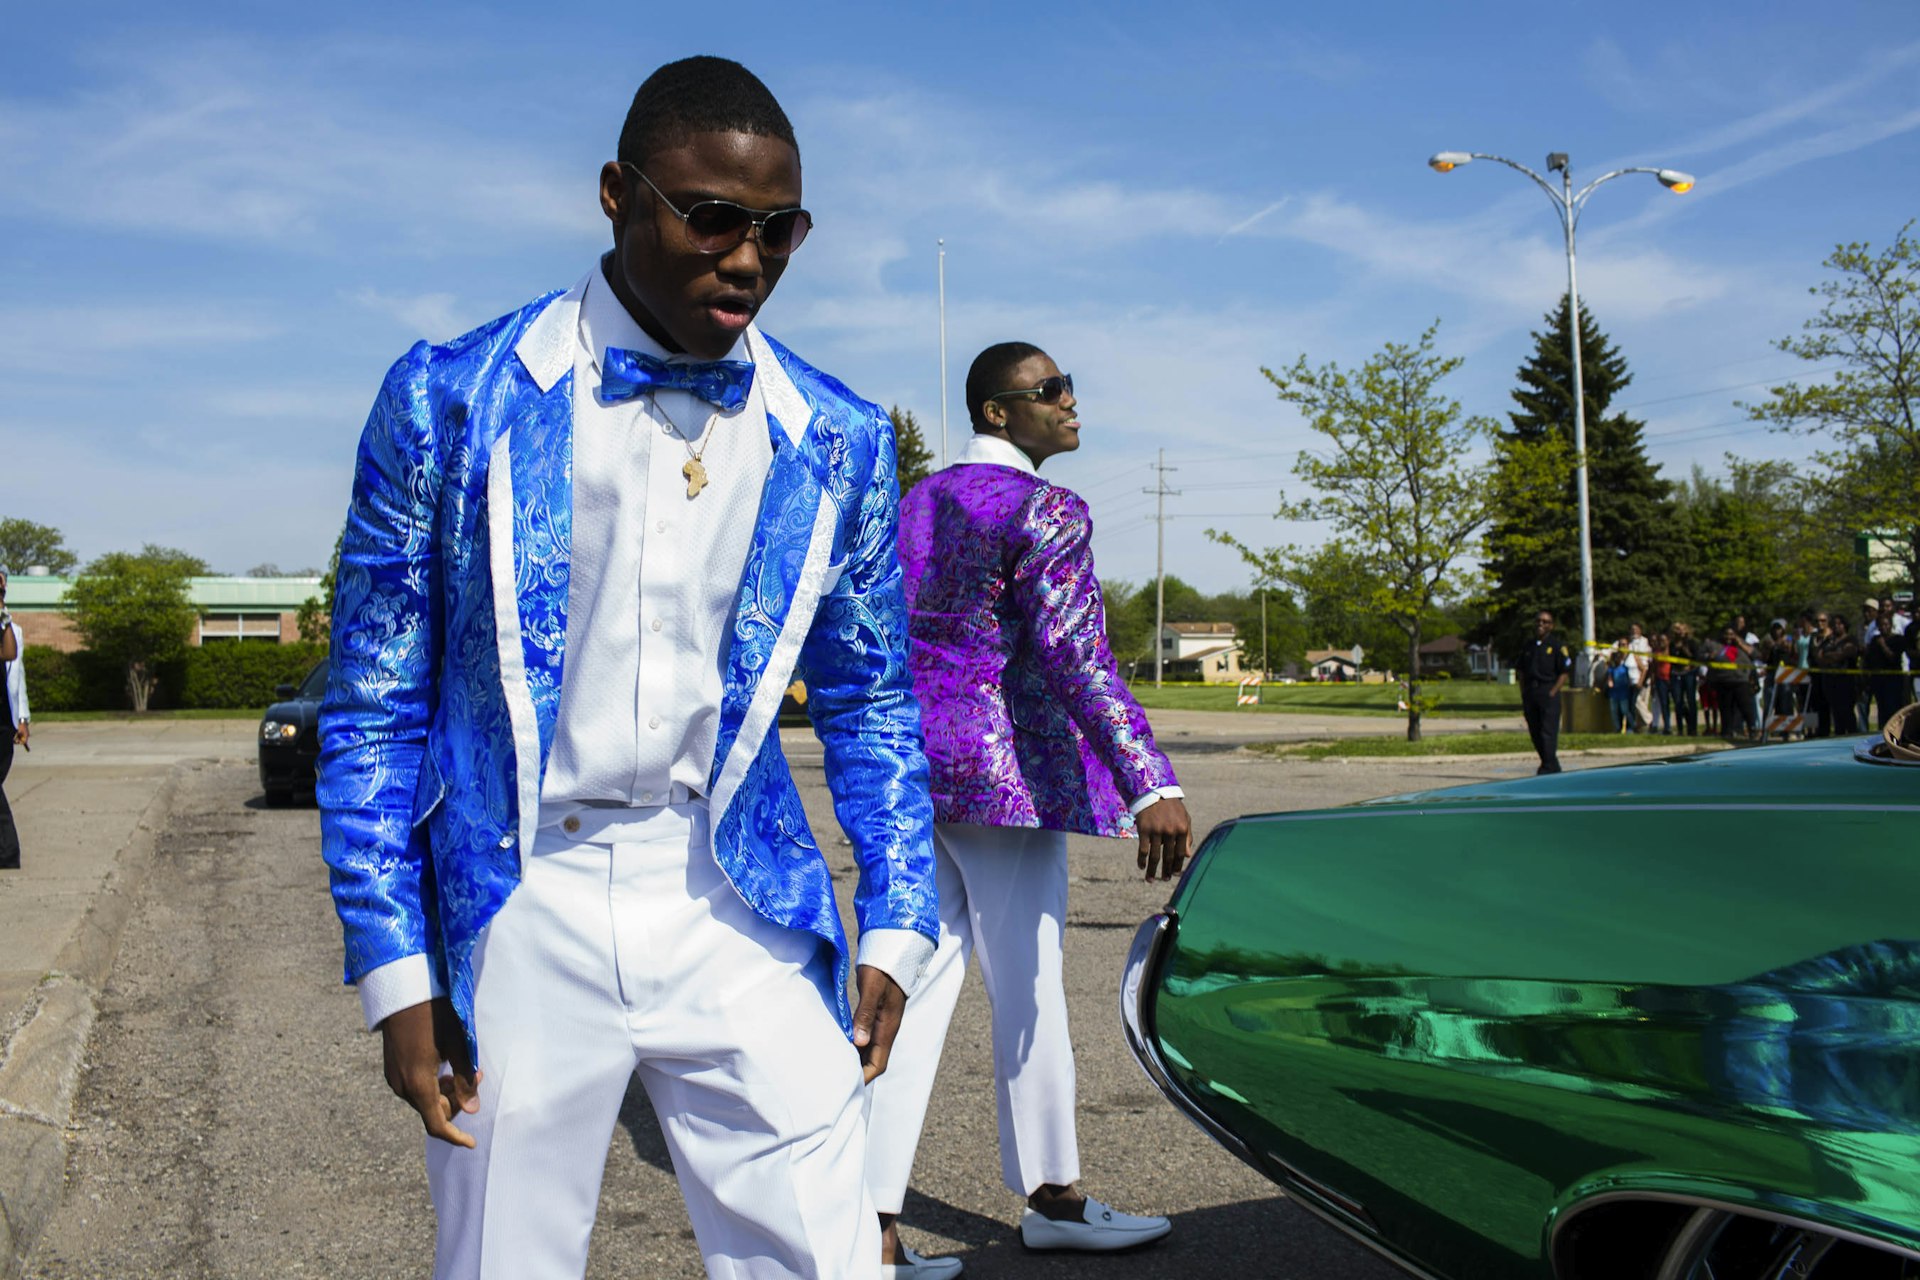 Twins Antwoin (in blue) and Anotnio Nelson, 18, arrive at their high school prom on Saturday, May 21, 2016 in Flint, Michigan.